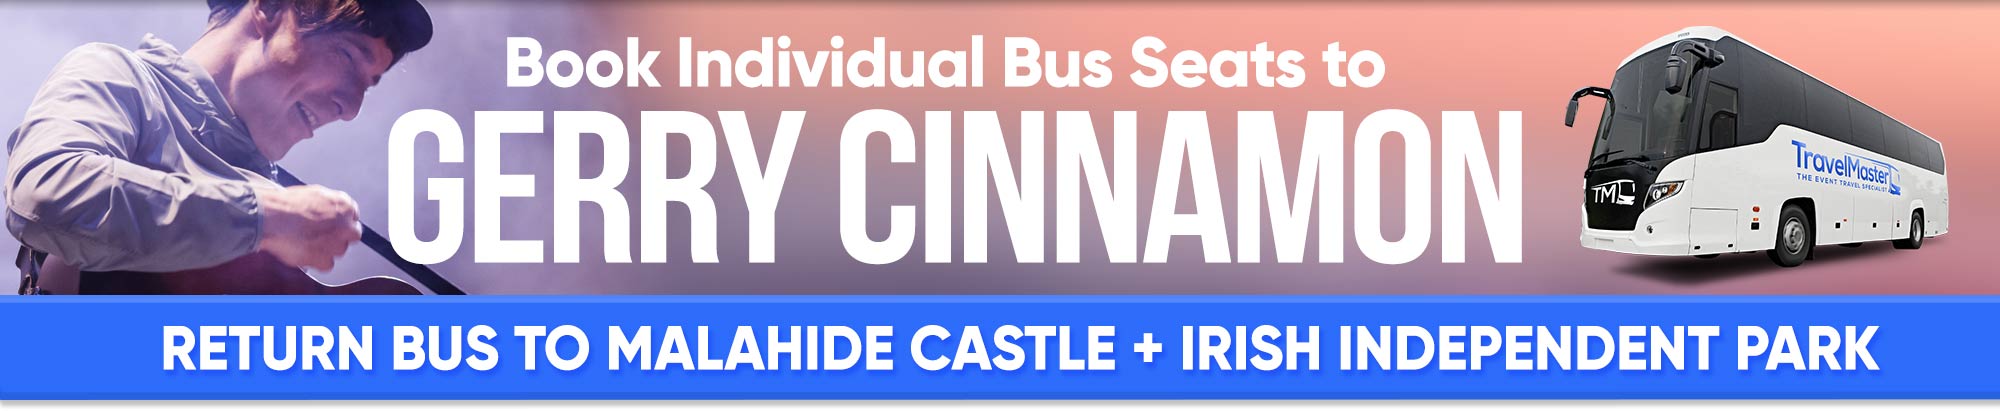 Bus to Gerry Cinnamon Concerts